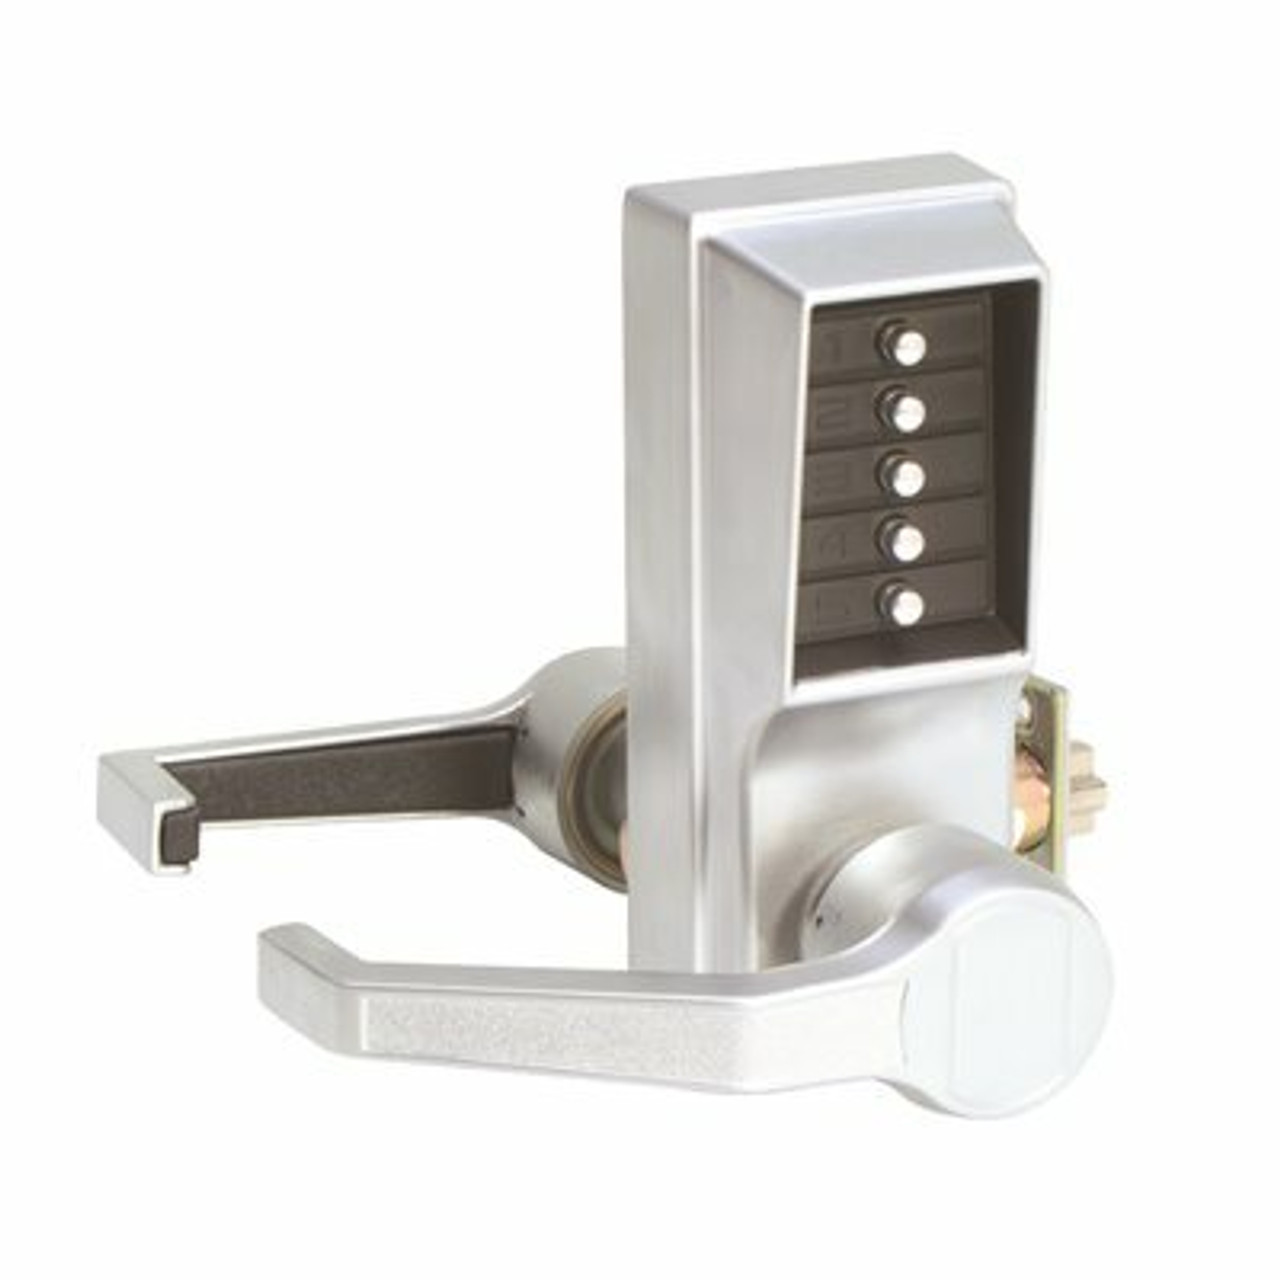 L1000 Right Hand Satin Chrome Cylindrical Lock With Lever, No Key Overide